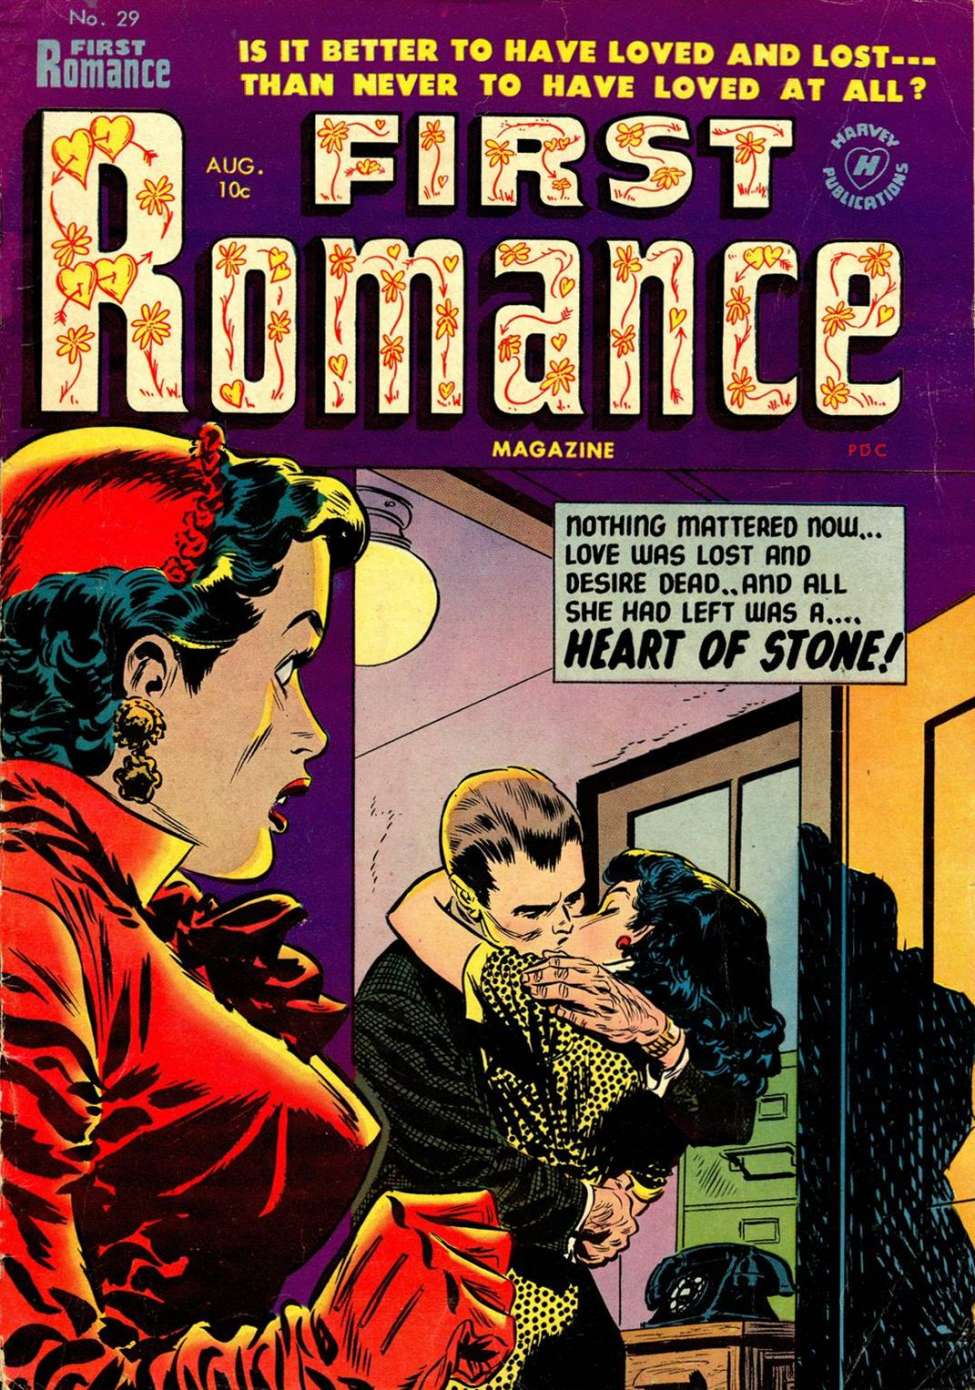 Book Cover For First Romance Magazine 29